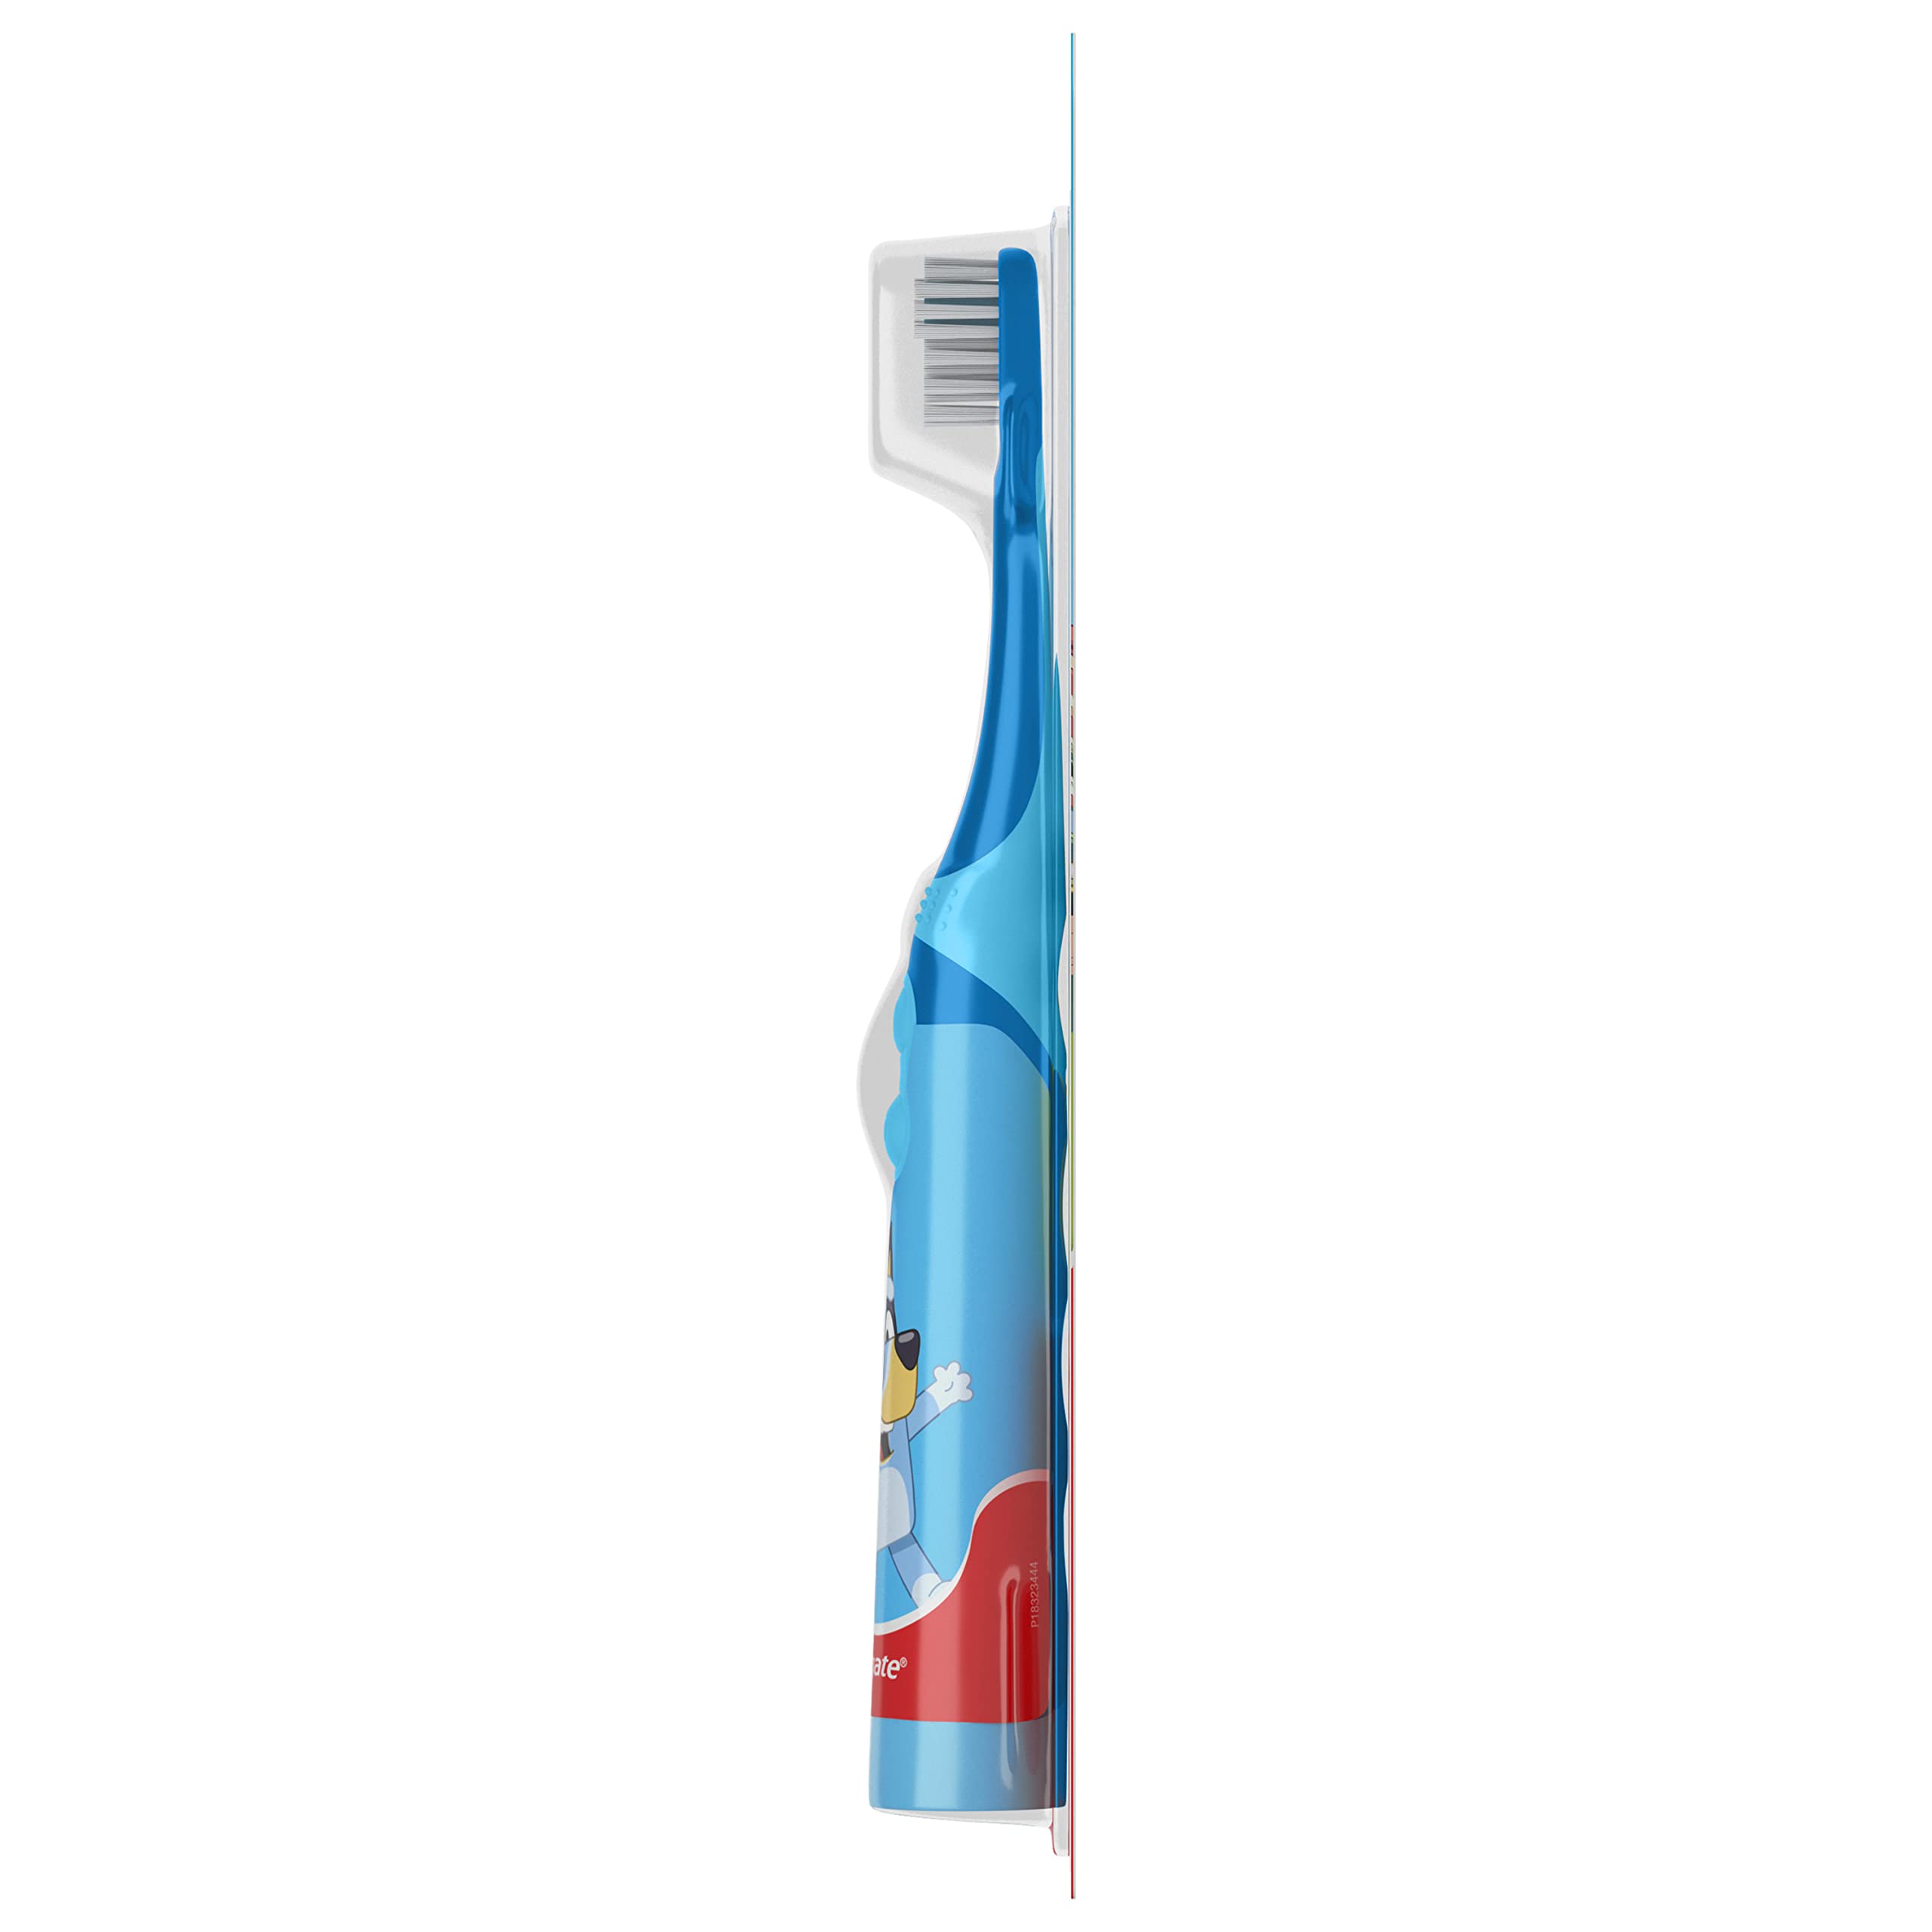 Colgate Kids Battery Powered Toothbrush with Included AA Battery, Extra Soft Bristles, Flat-Laying Handle to Prevent Rolling, Bluey Toothbrush, 1 Pack